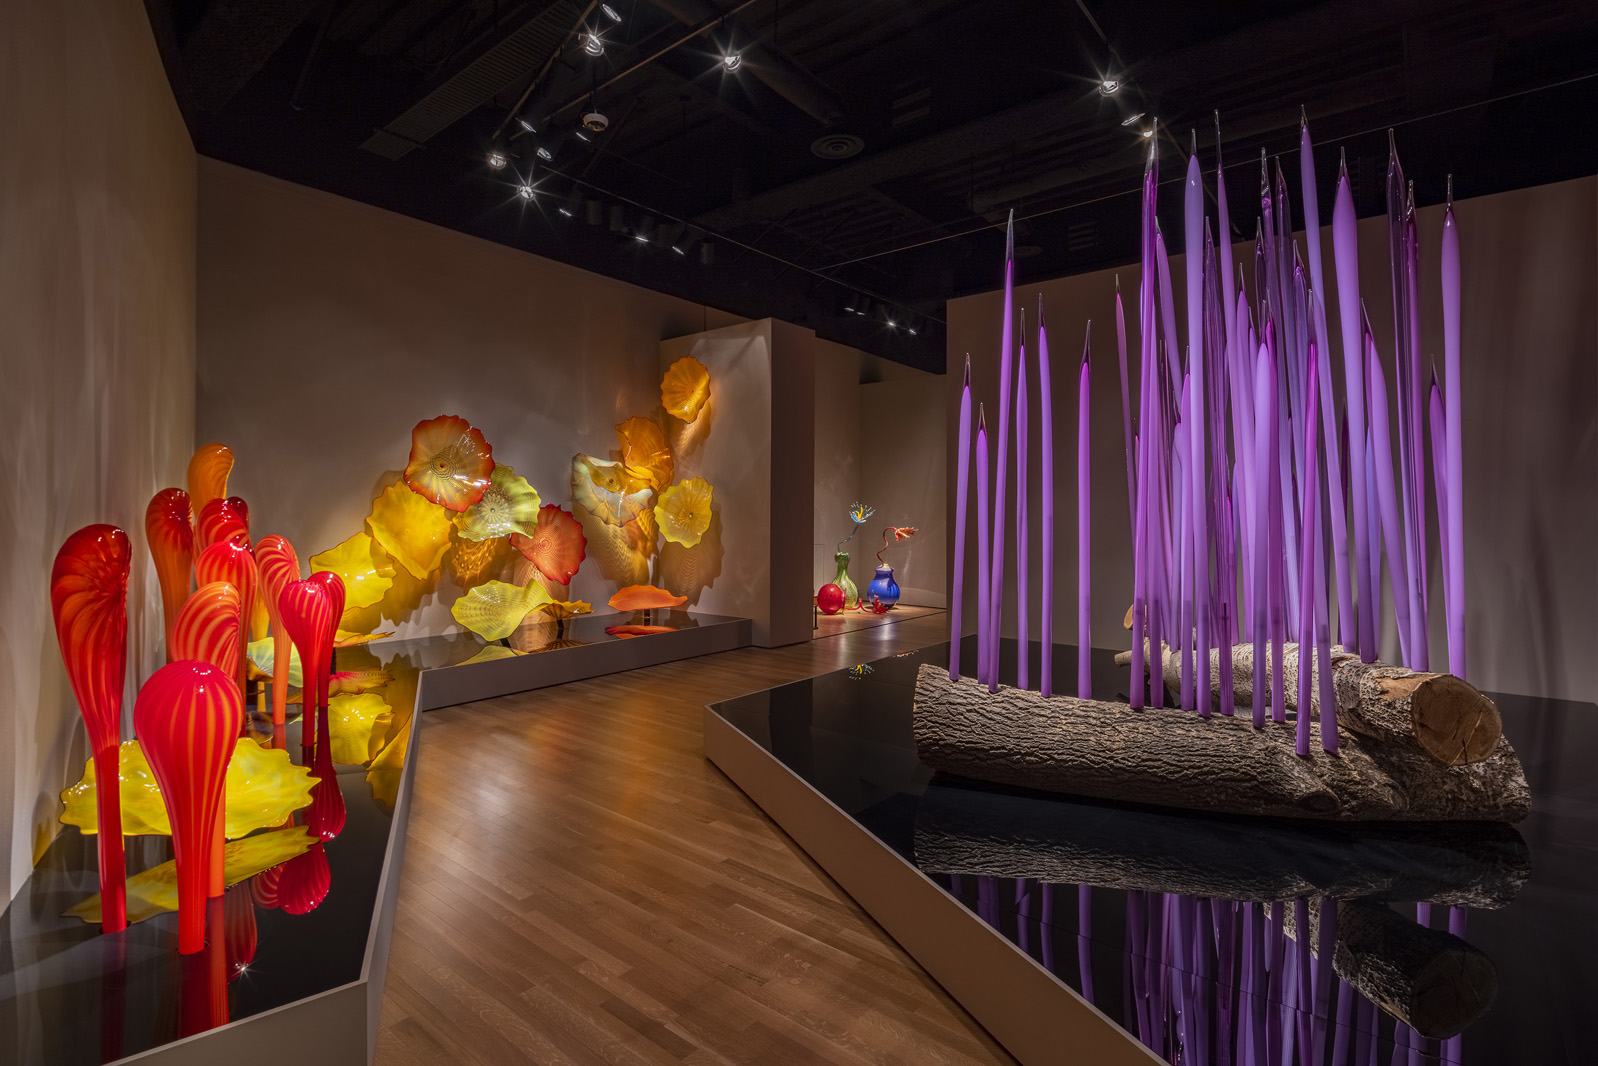 Tiger Lilies, Autumn Gold Persian Wall, and Neodymium Reeds, 2002 by Dale Chihuly